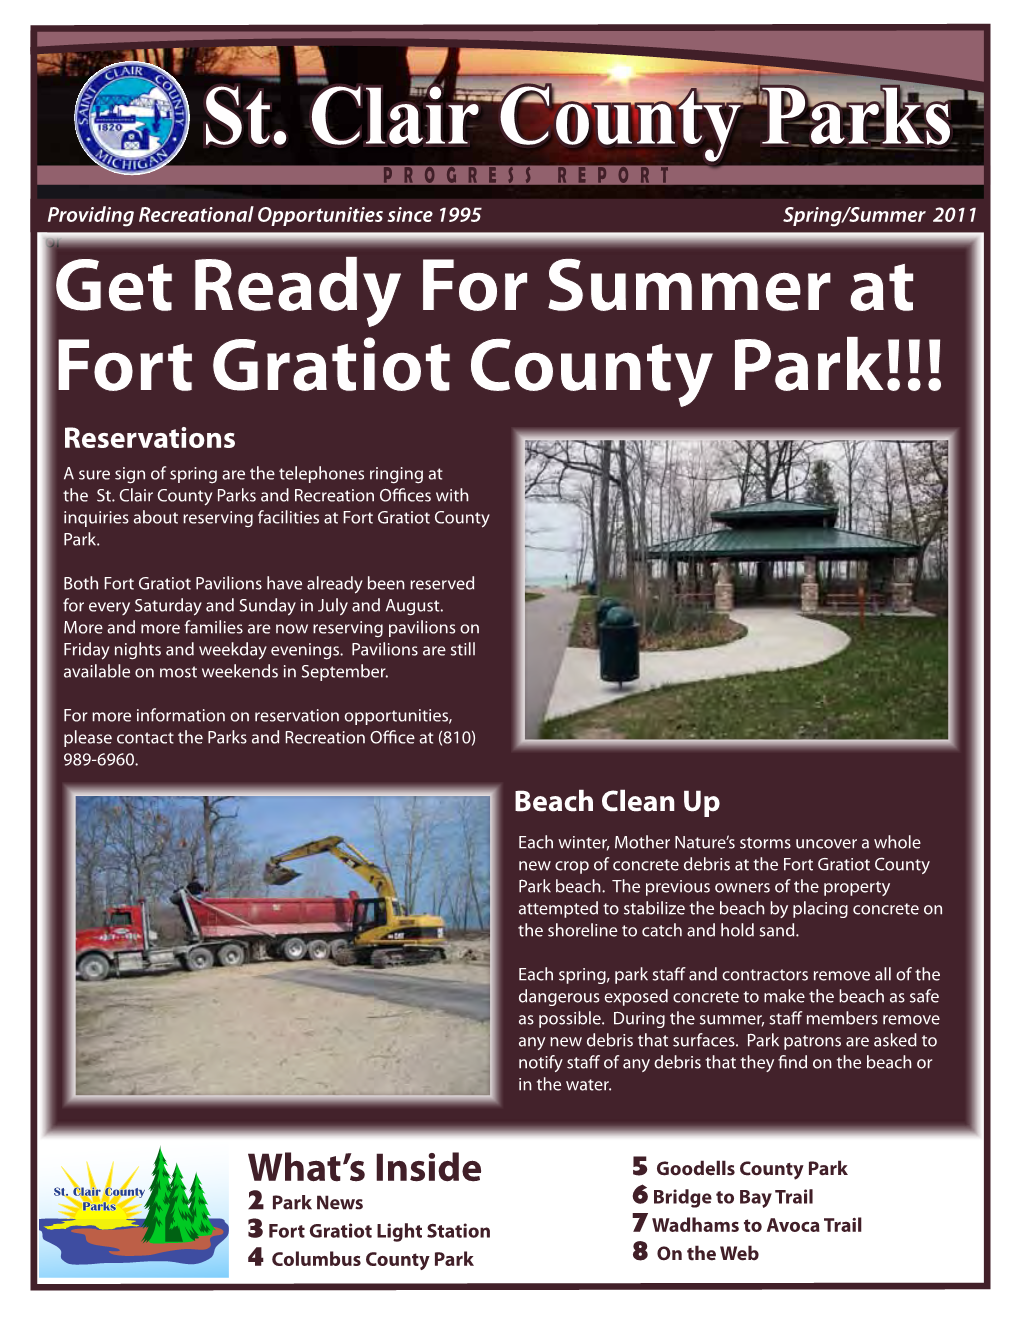 Get Ready for Summer at Fort Gratiot County Park!!! Reservations a Sure Sign of Spring Are the Telephones Ringing at the St